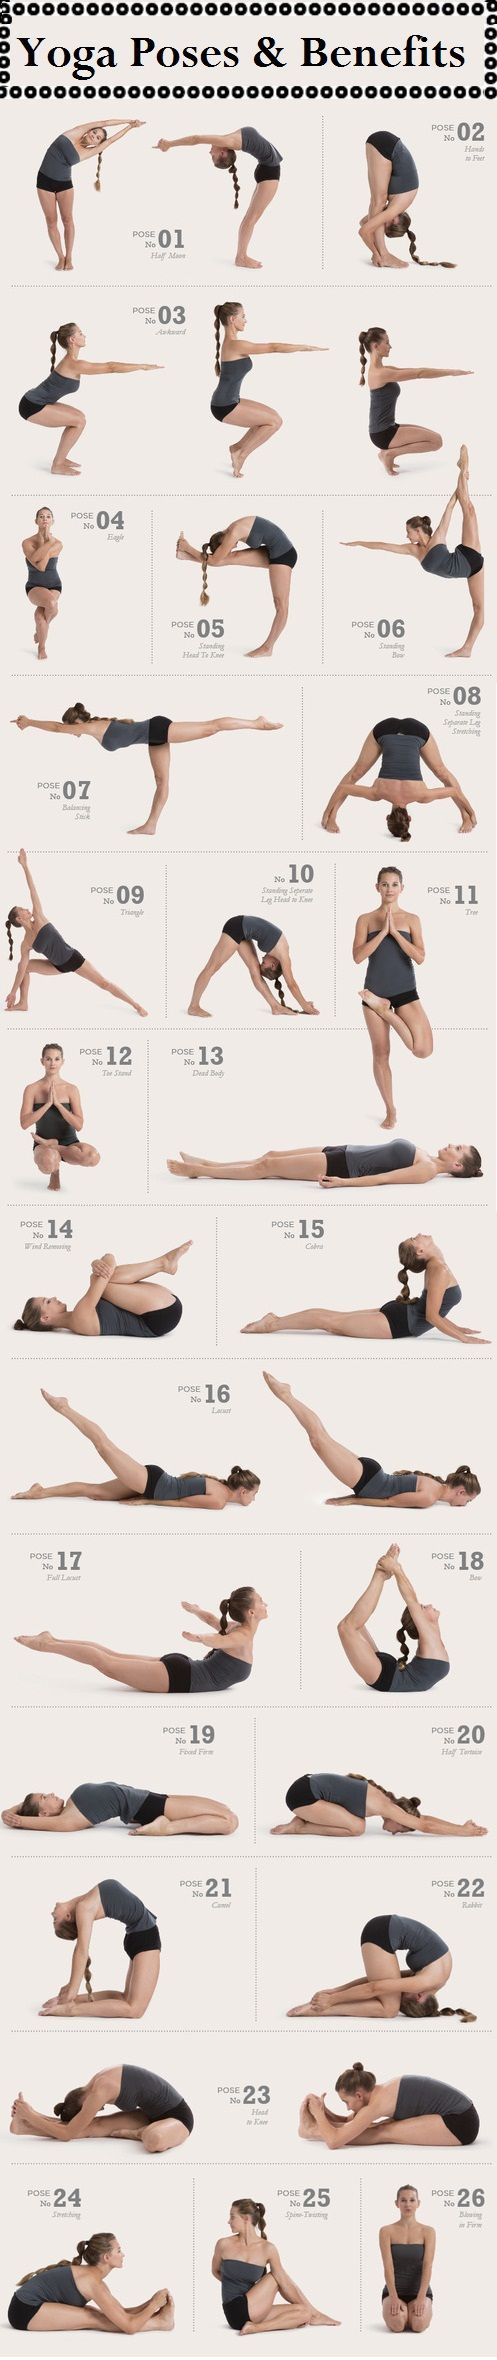 Yoga poses to work every part of the body.